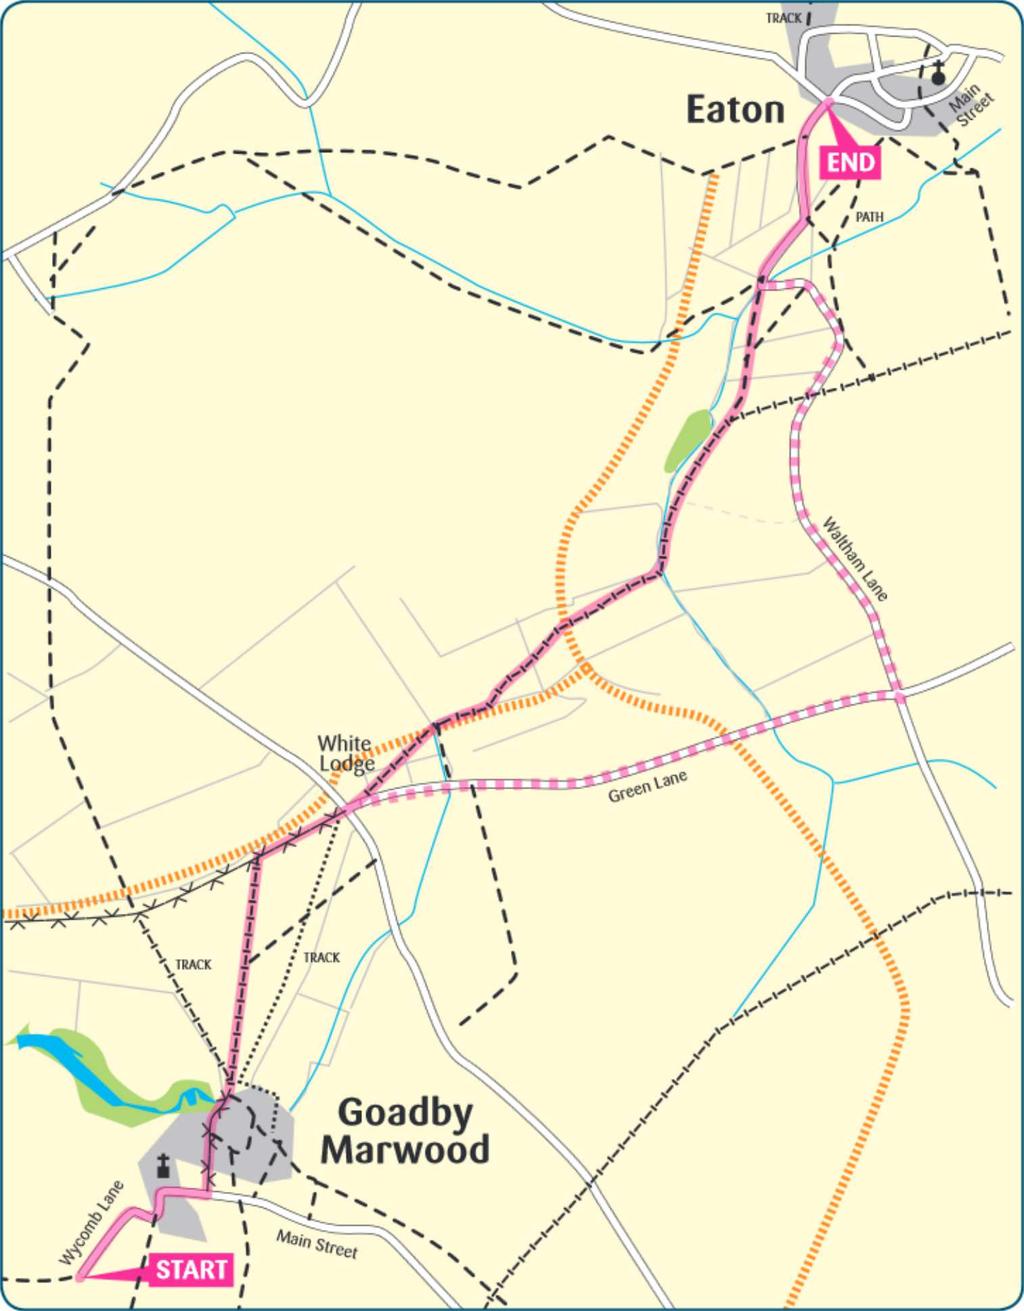 Goadby Marwood to Eaton A mixture of arable and pasture land.